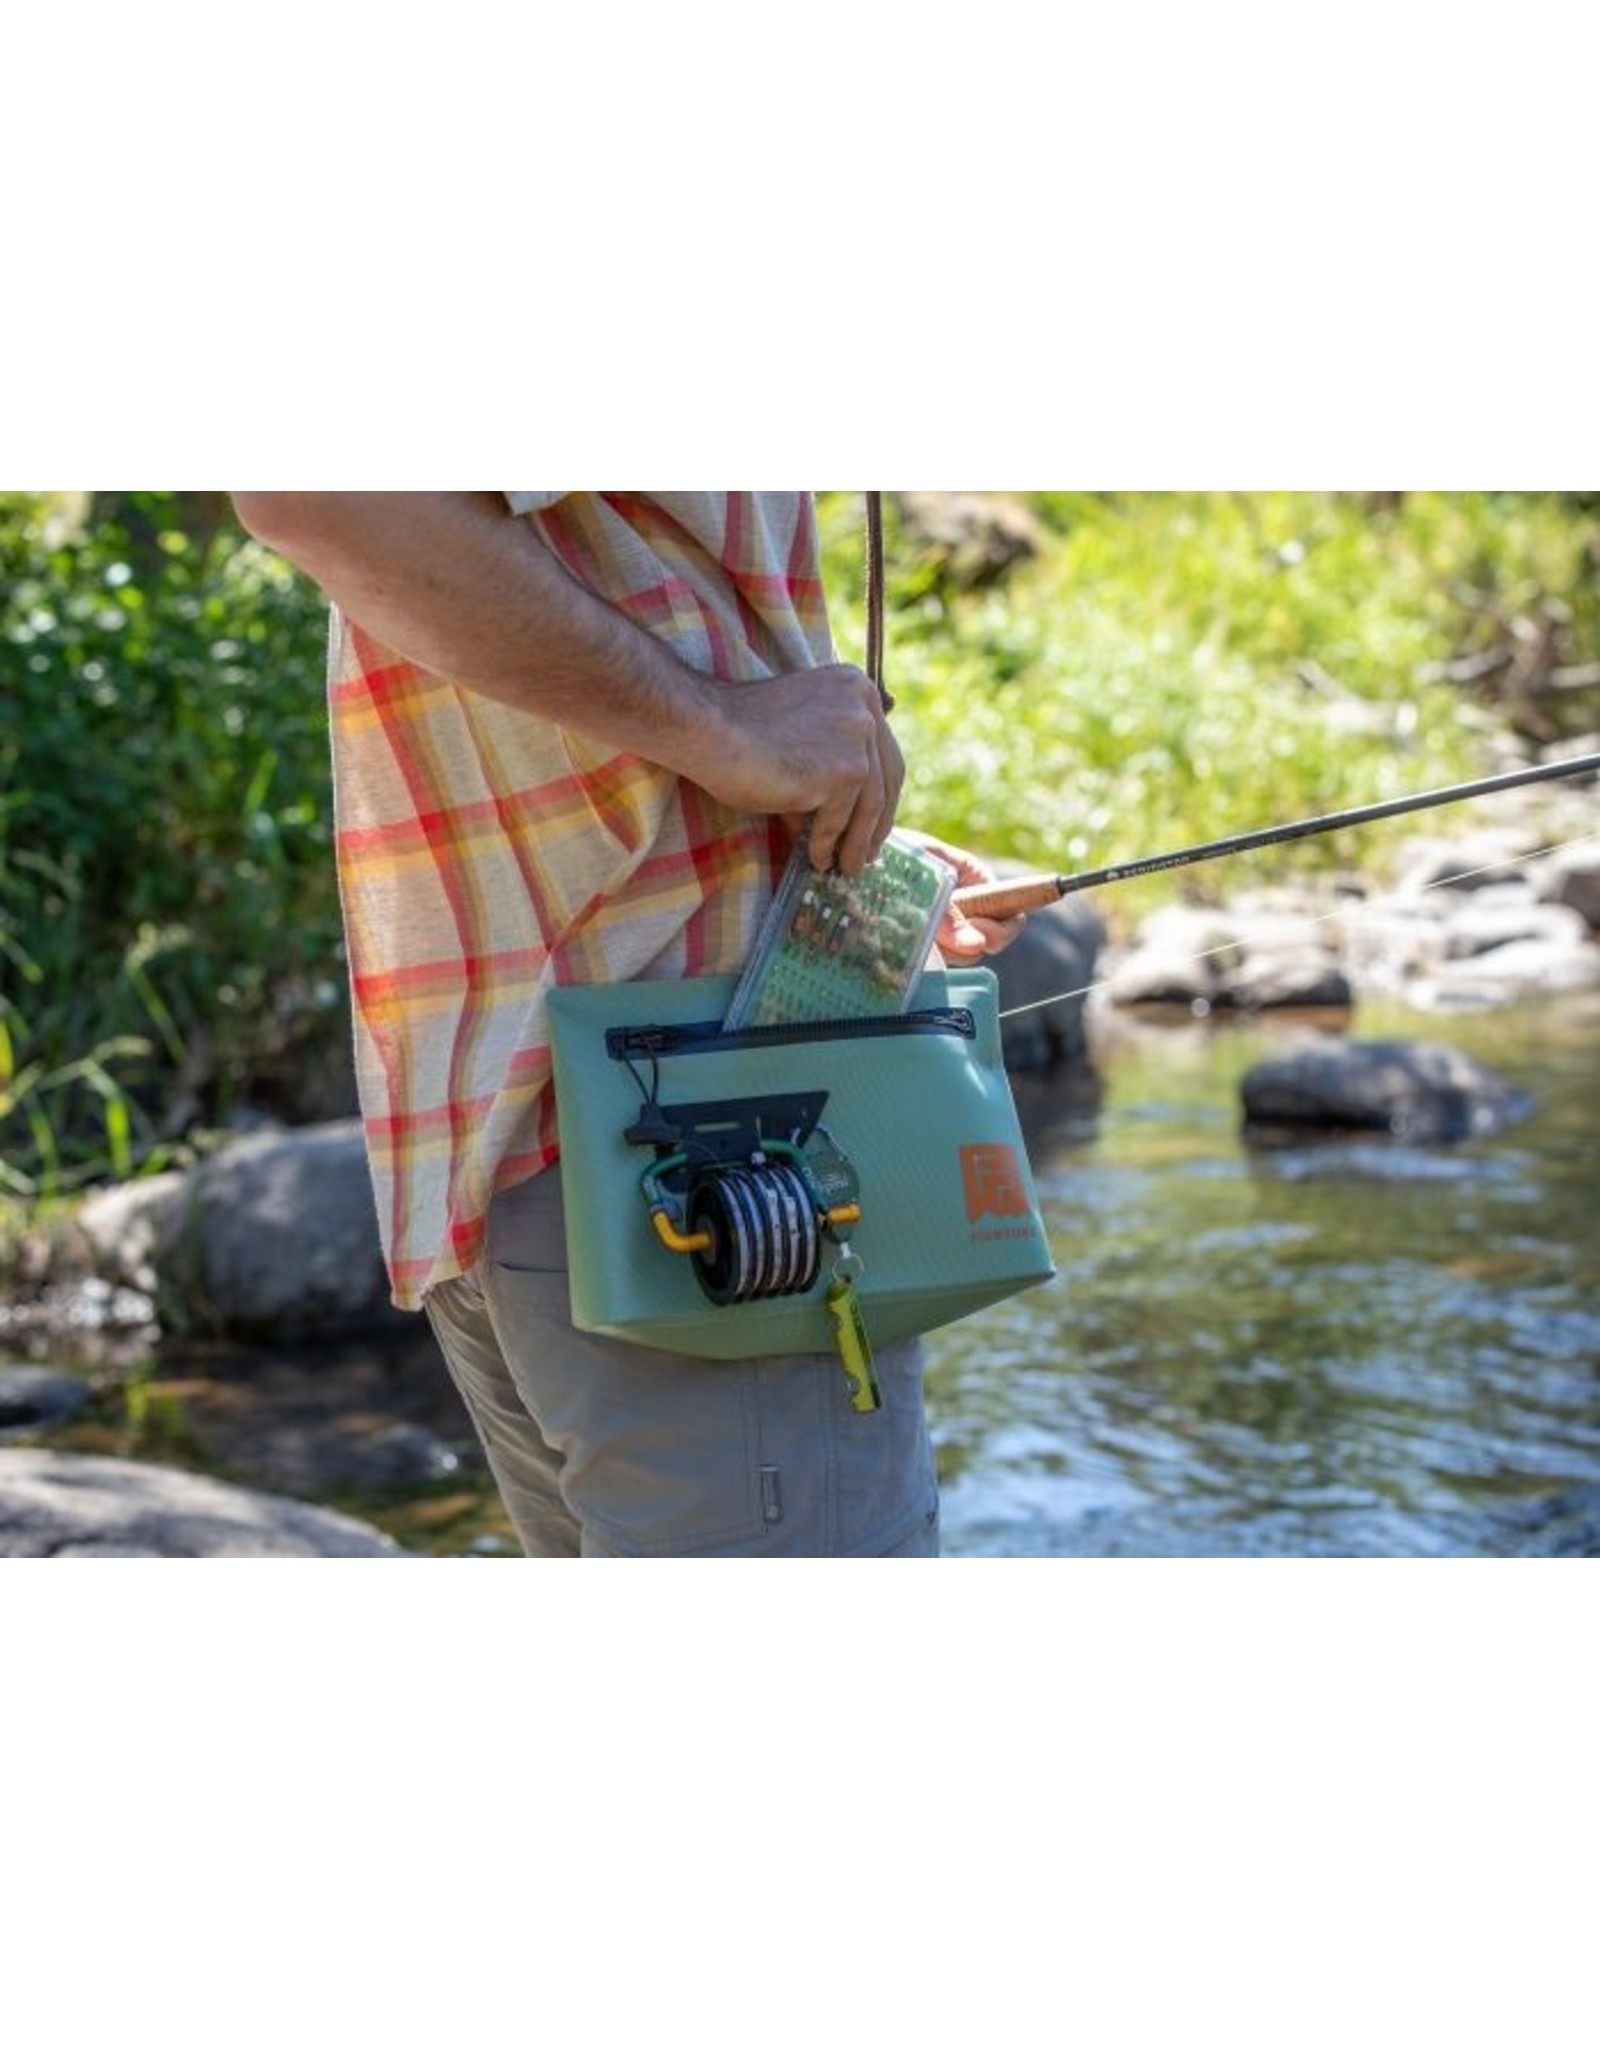 Fishpond Fishpond - Thunderhead Submersible Pouch